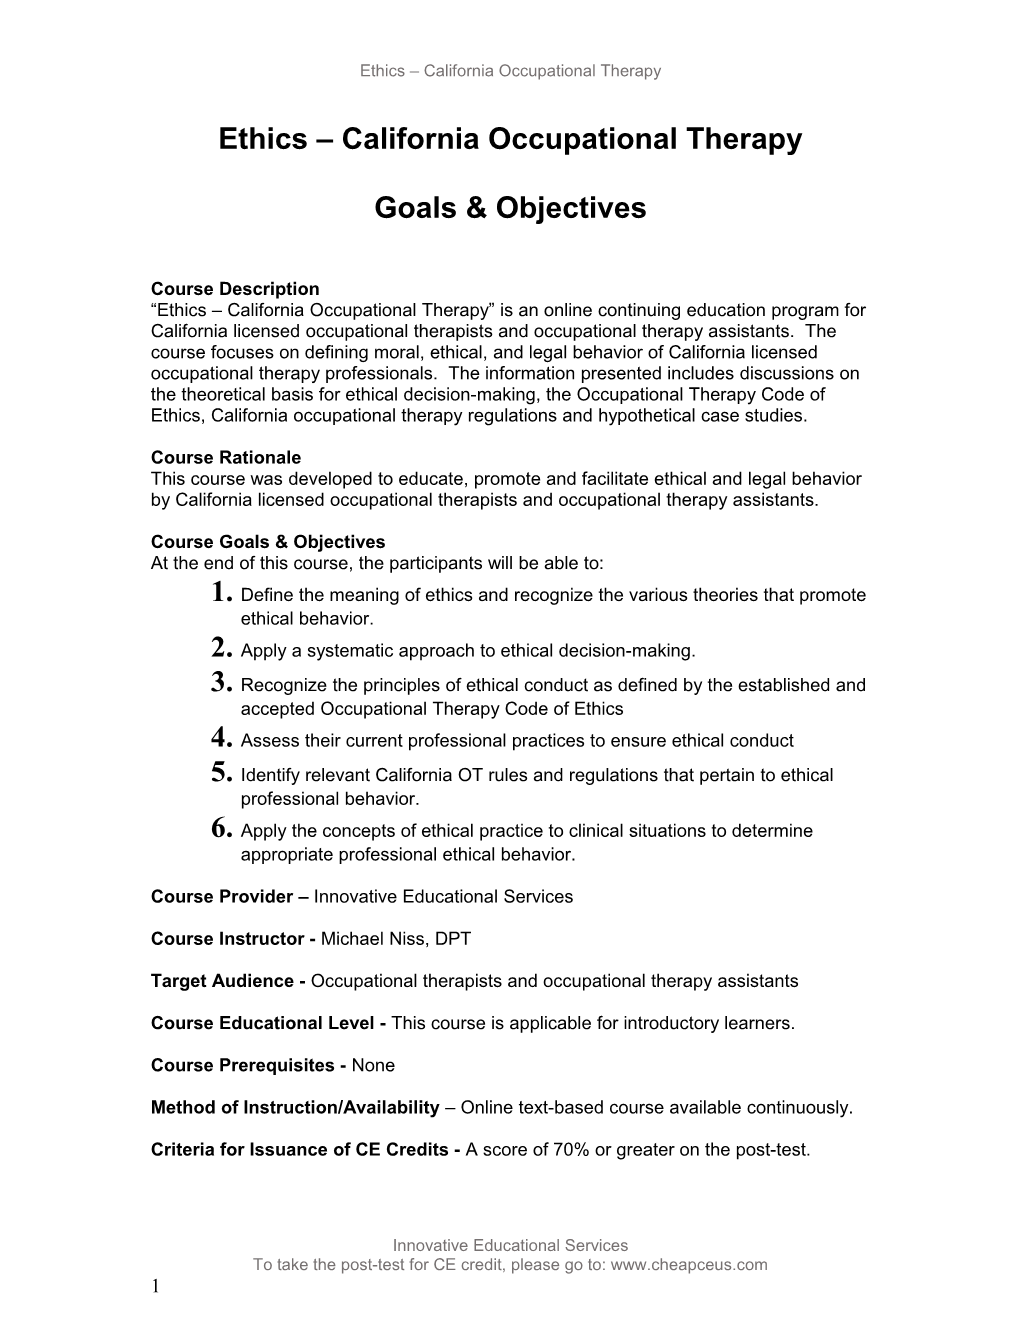 Ohio Occupational Therapy Ethics